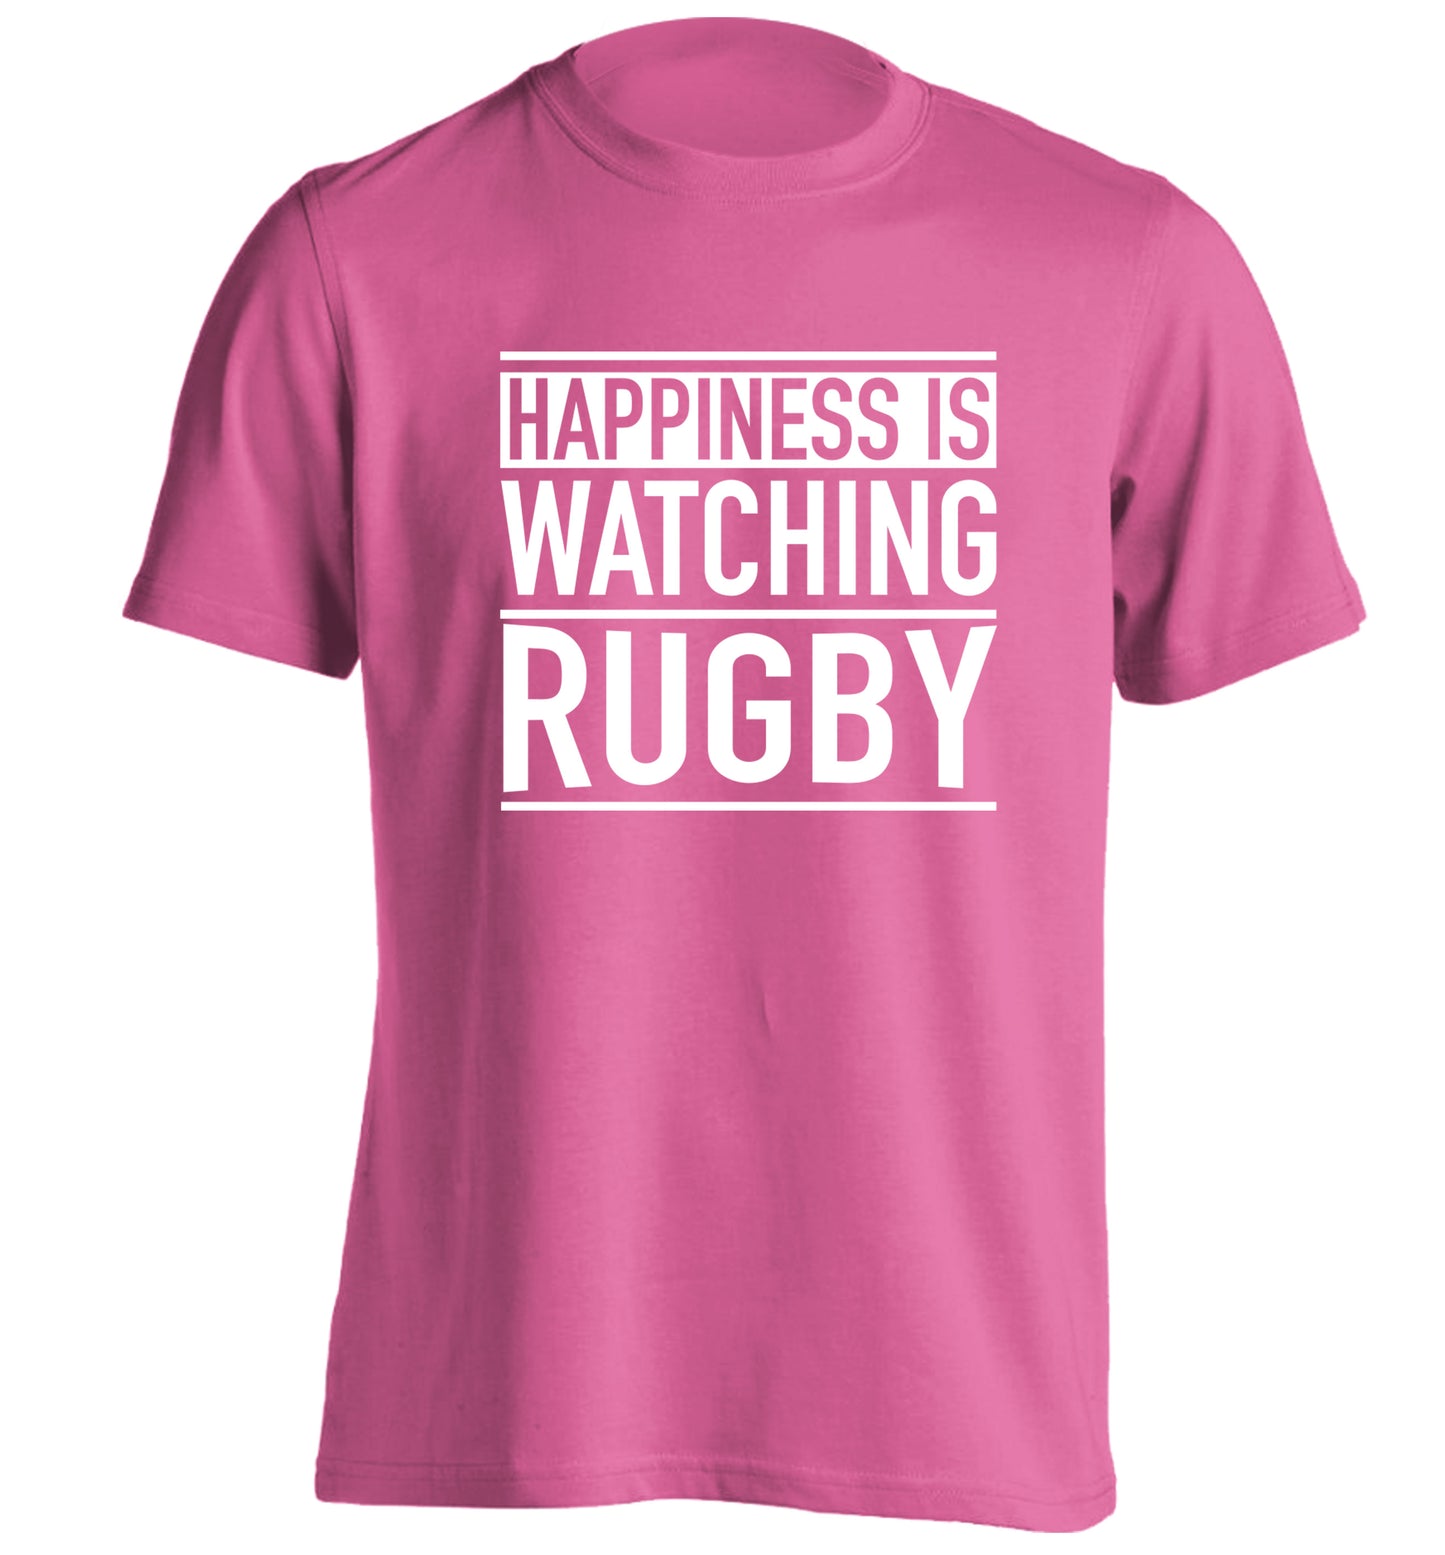 Happiness is watching rugby adults unisex pink Tshirt 2XL